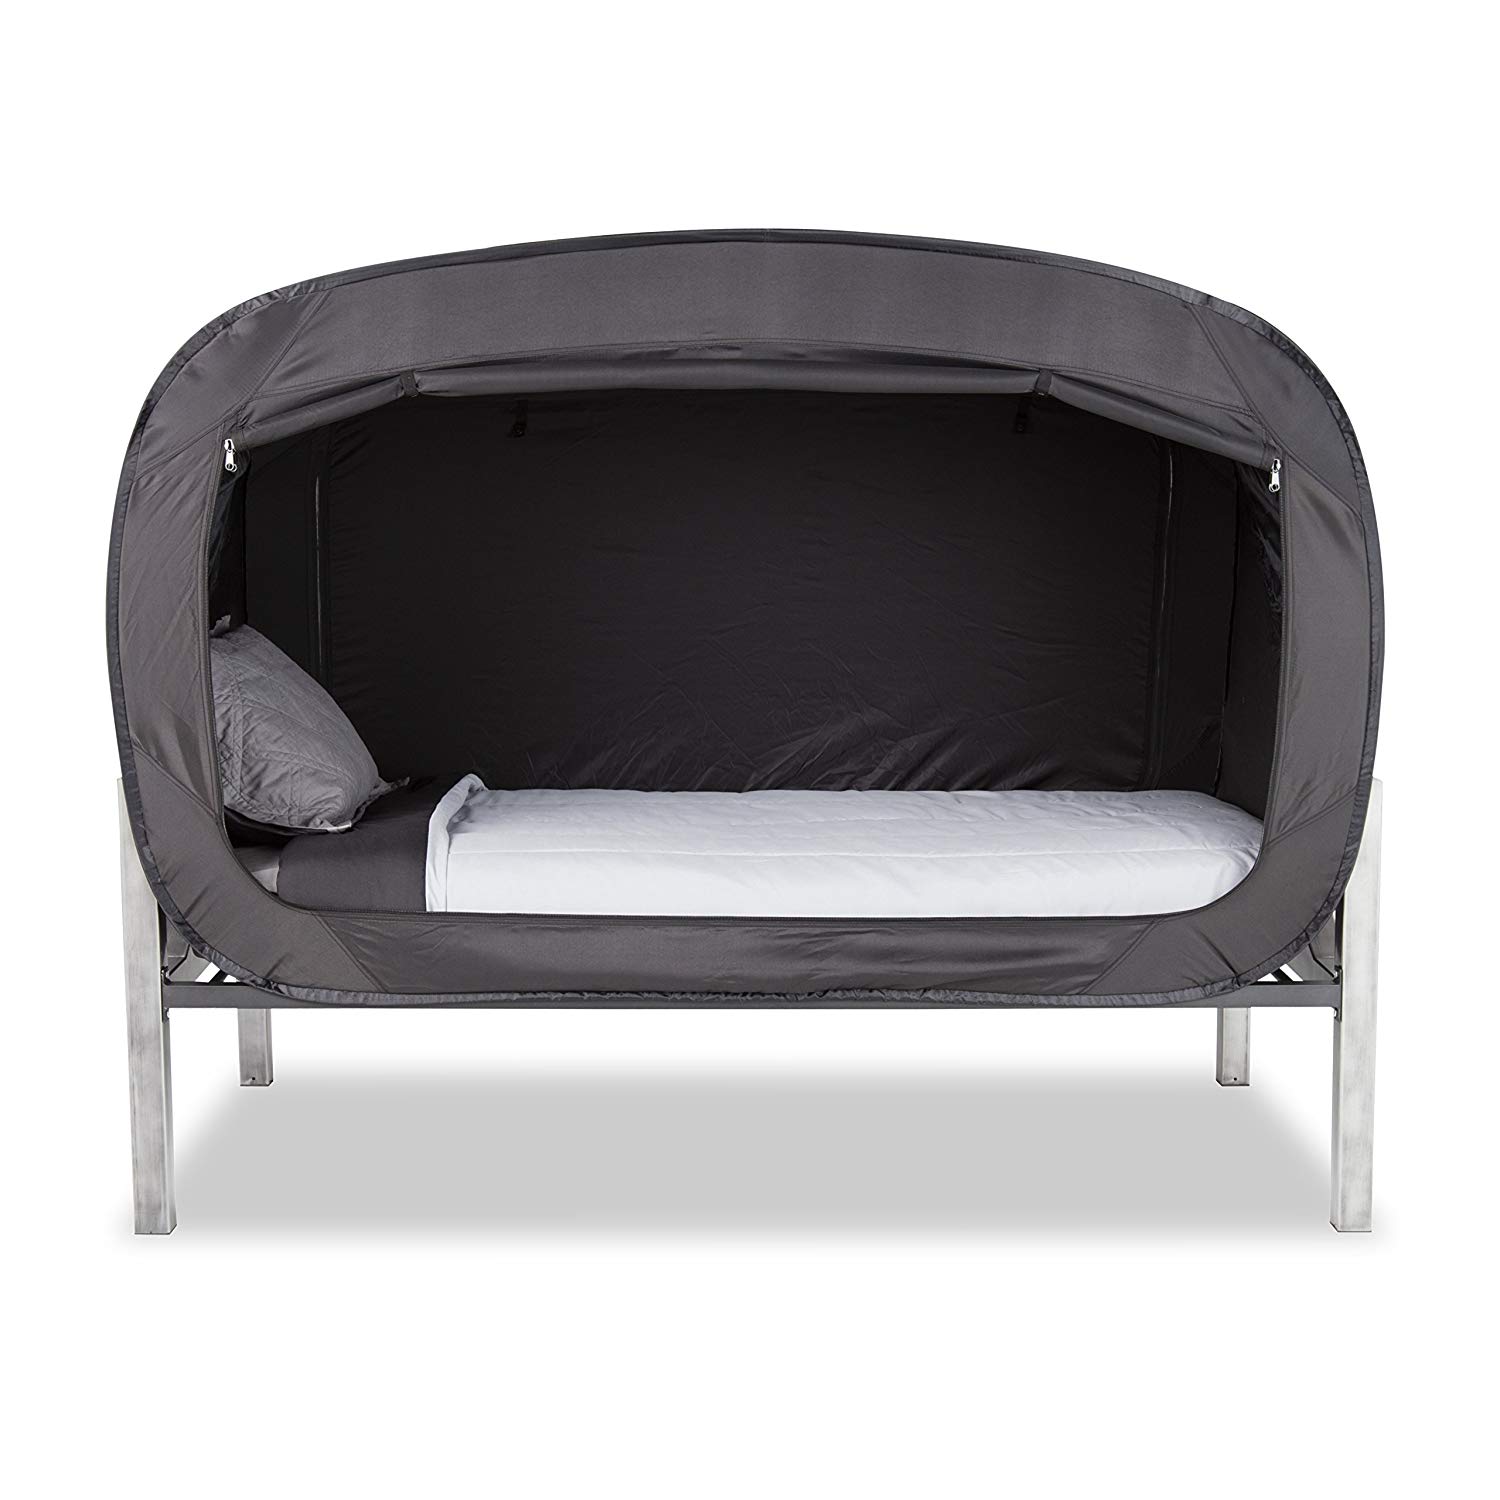 AIOIAI Privacy Bed Tent